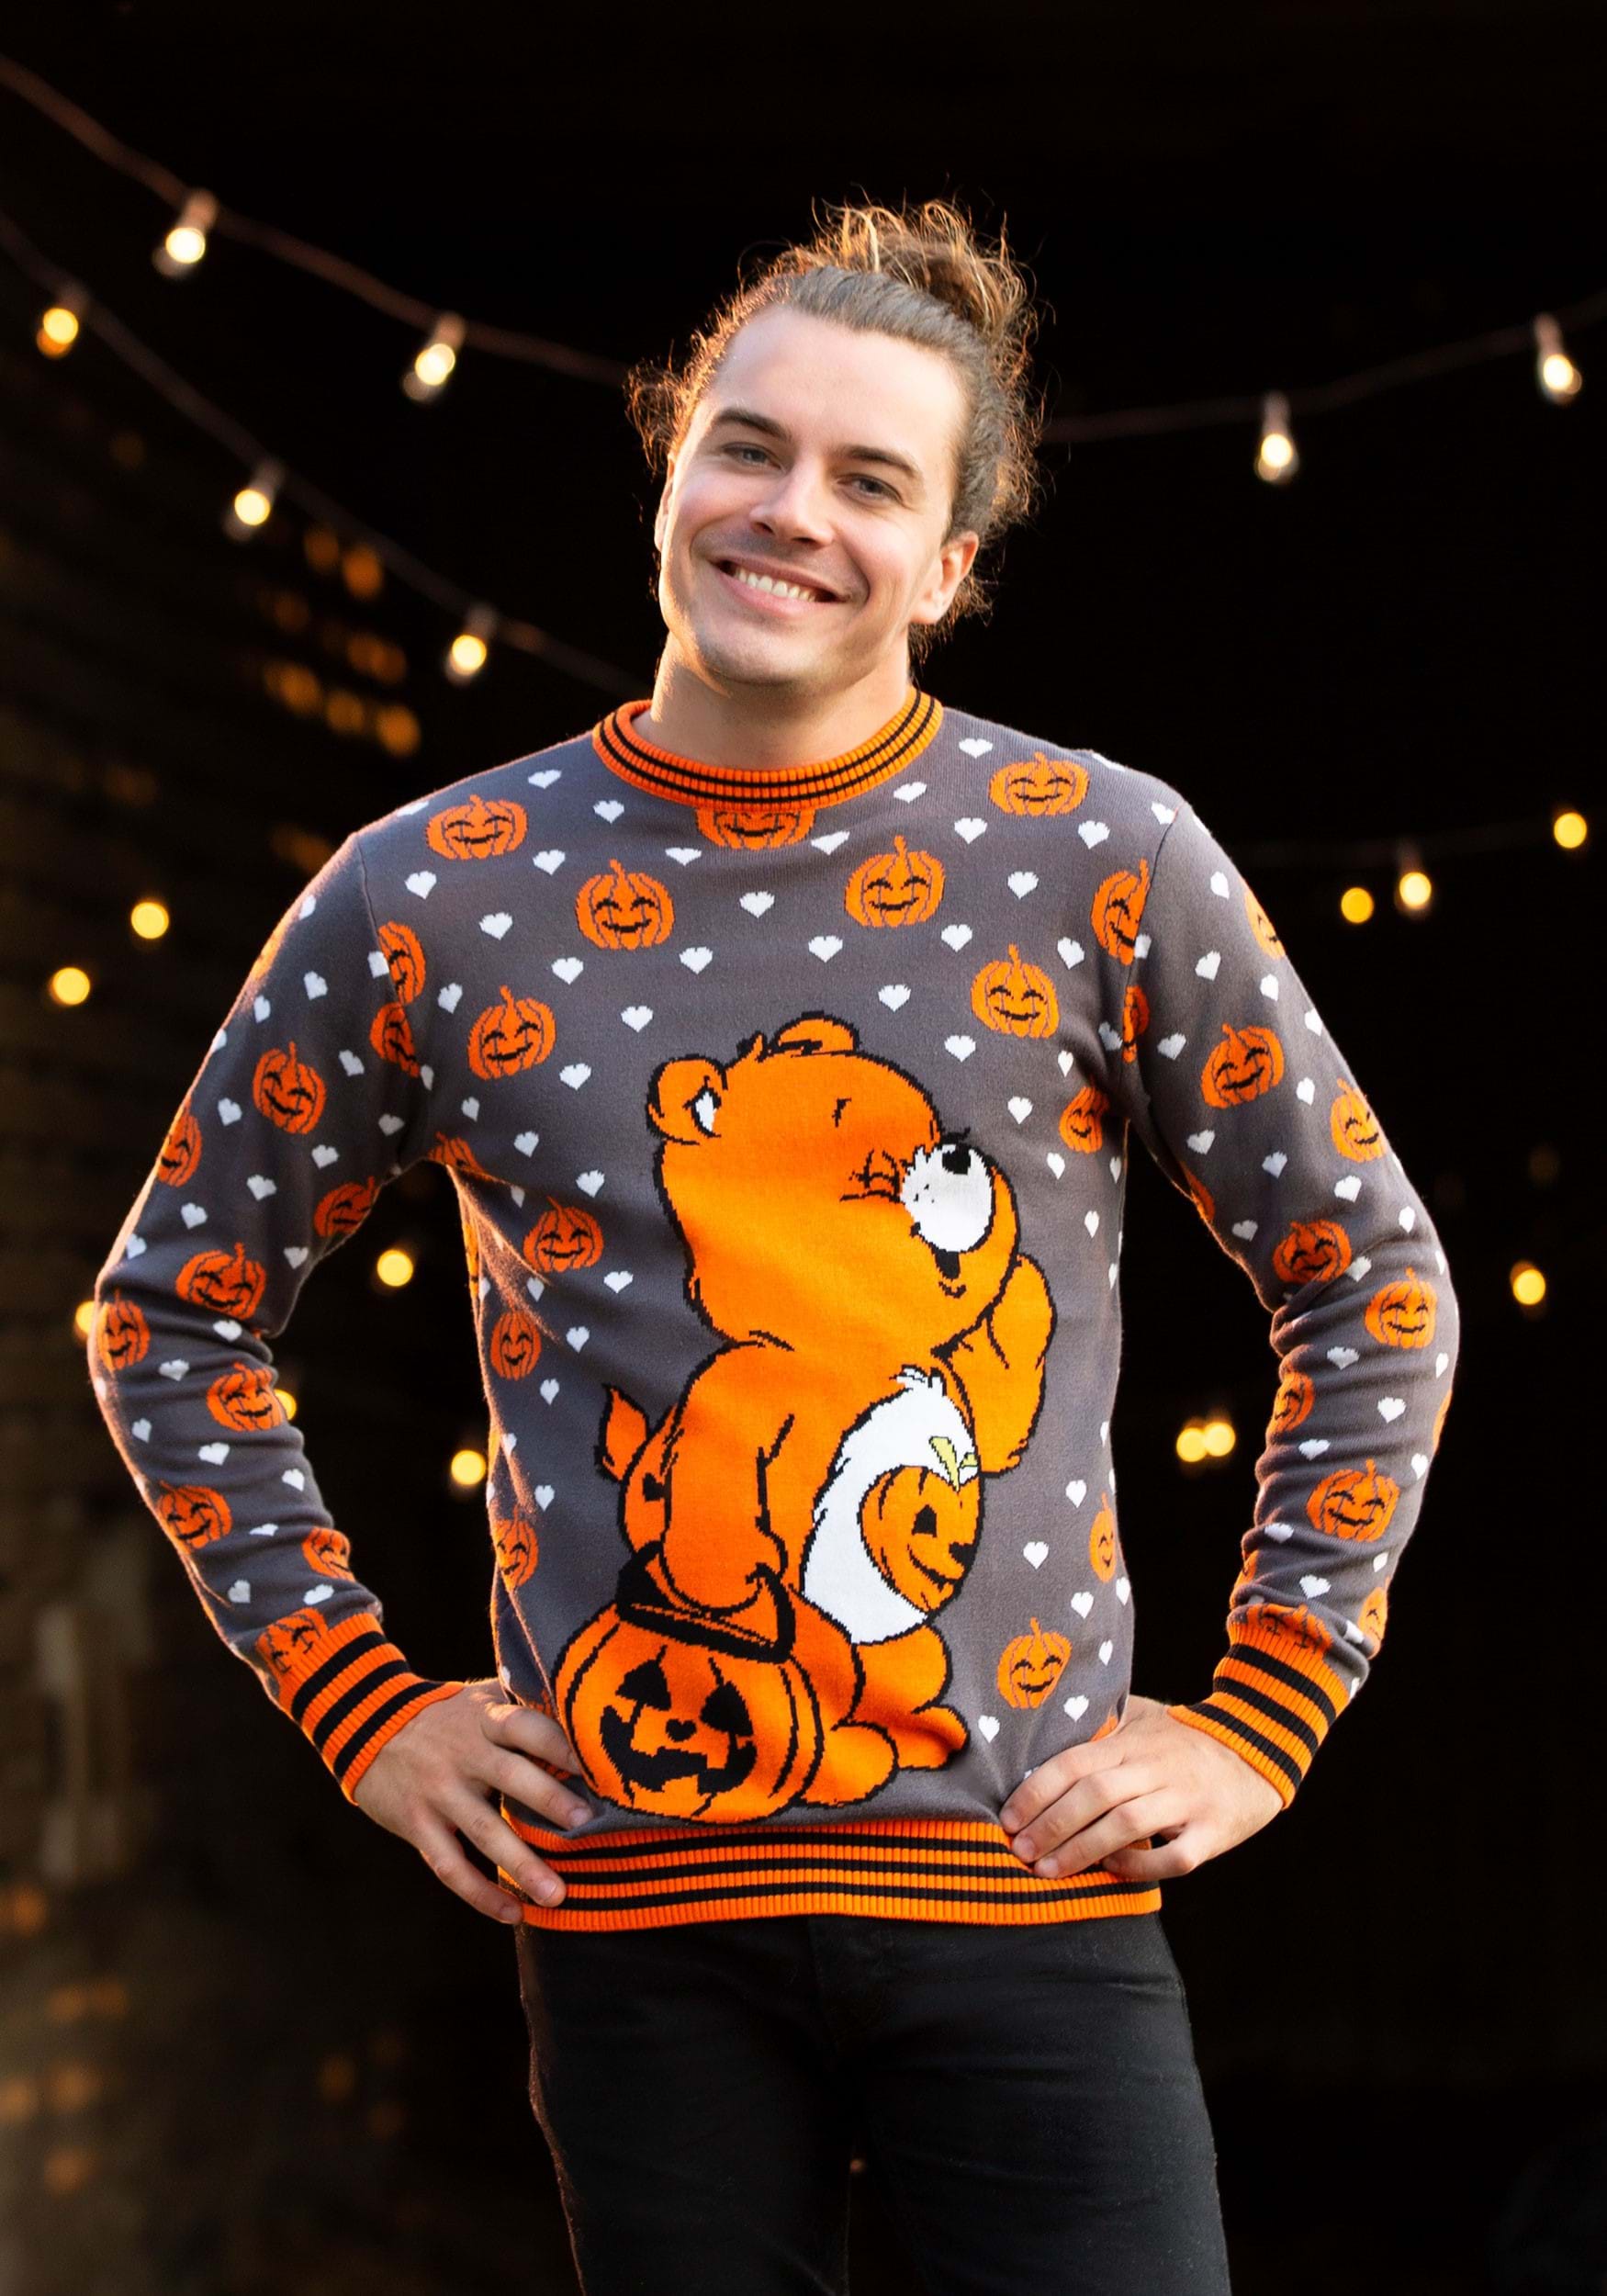 Care Bears Trick-or-Sweet Bear Adult Halloween Ugly Sweater